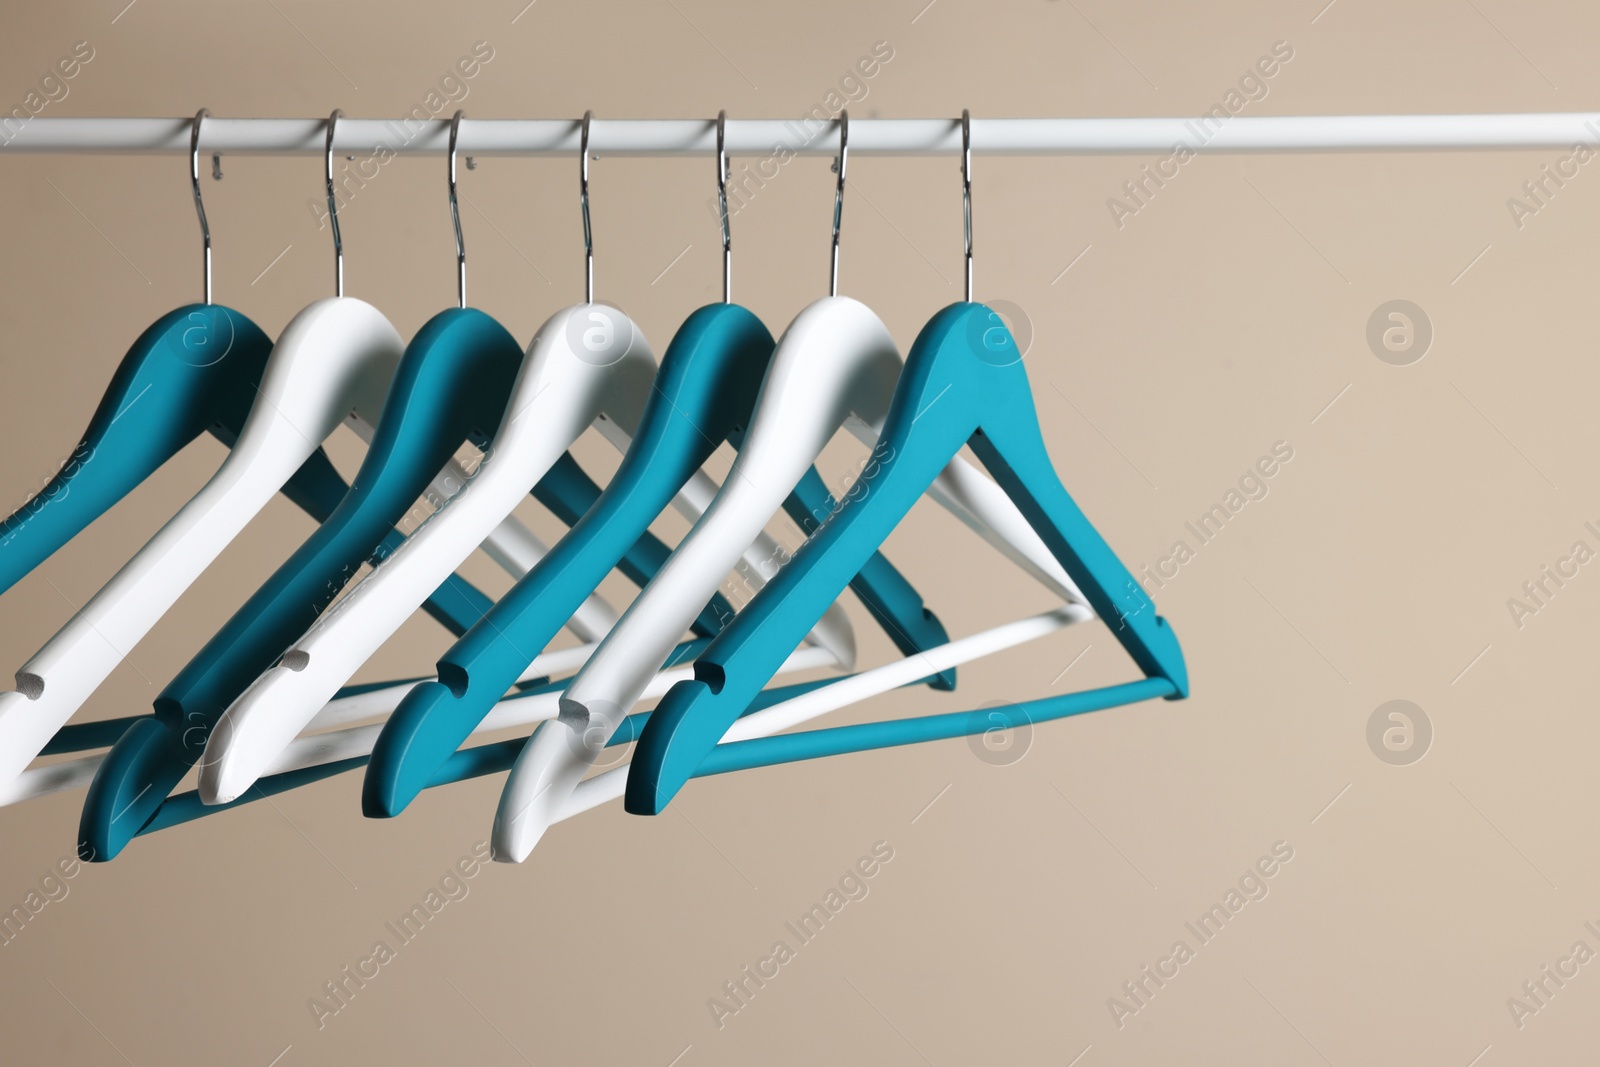 Photo of Clothes hangers on metal rail against beige background